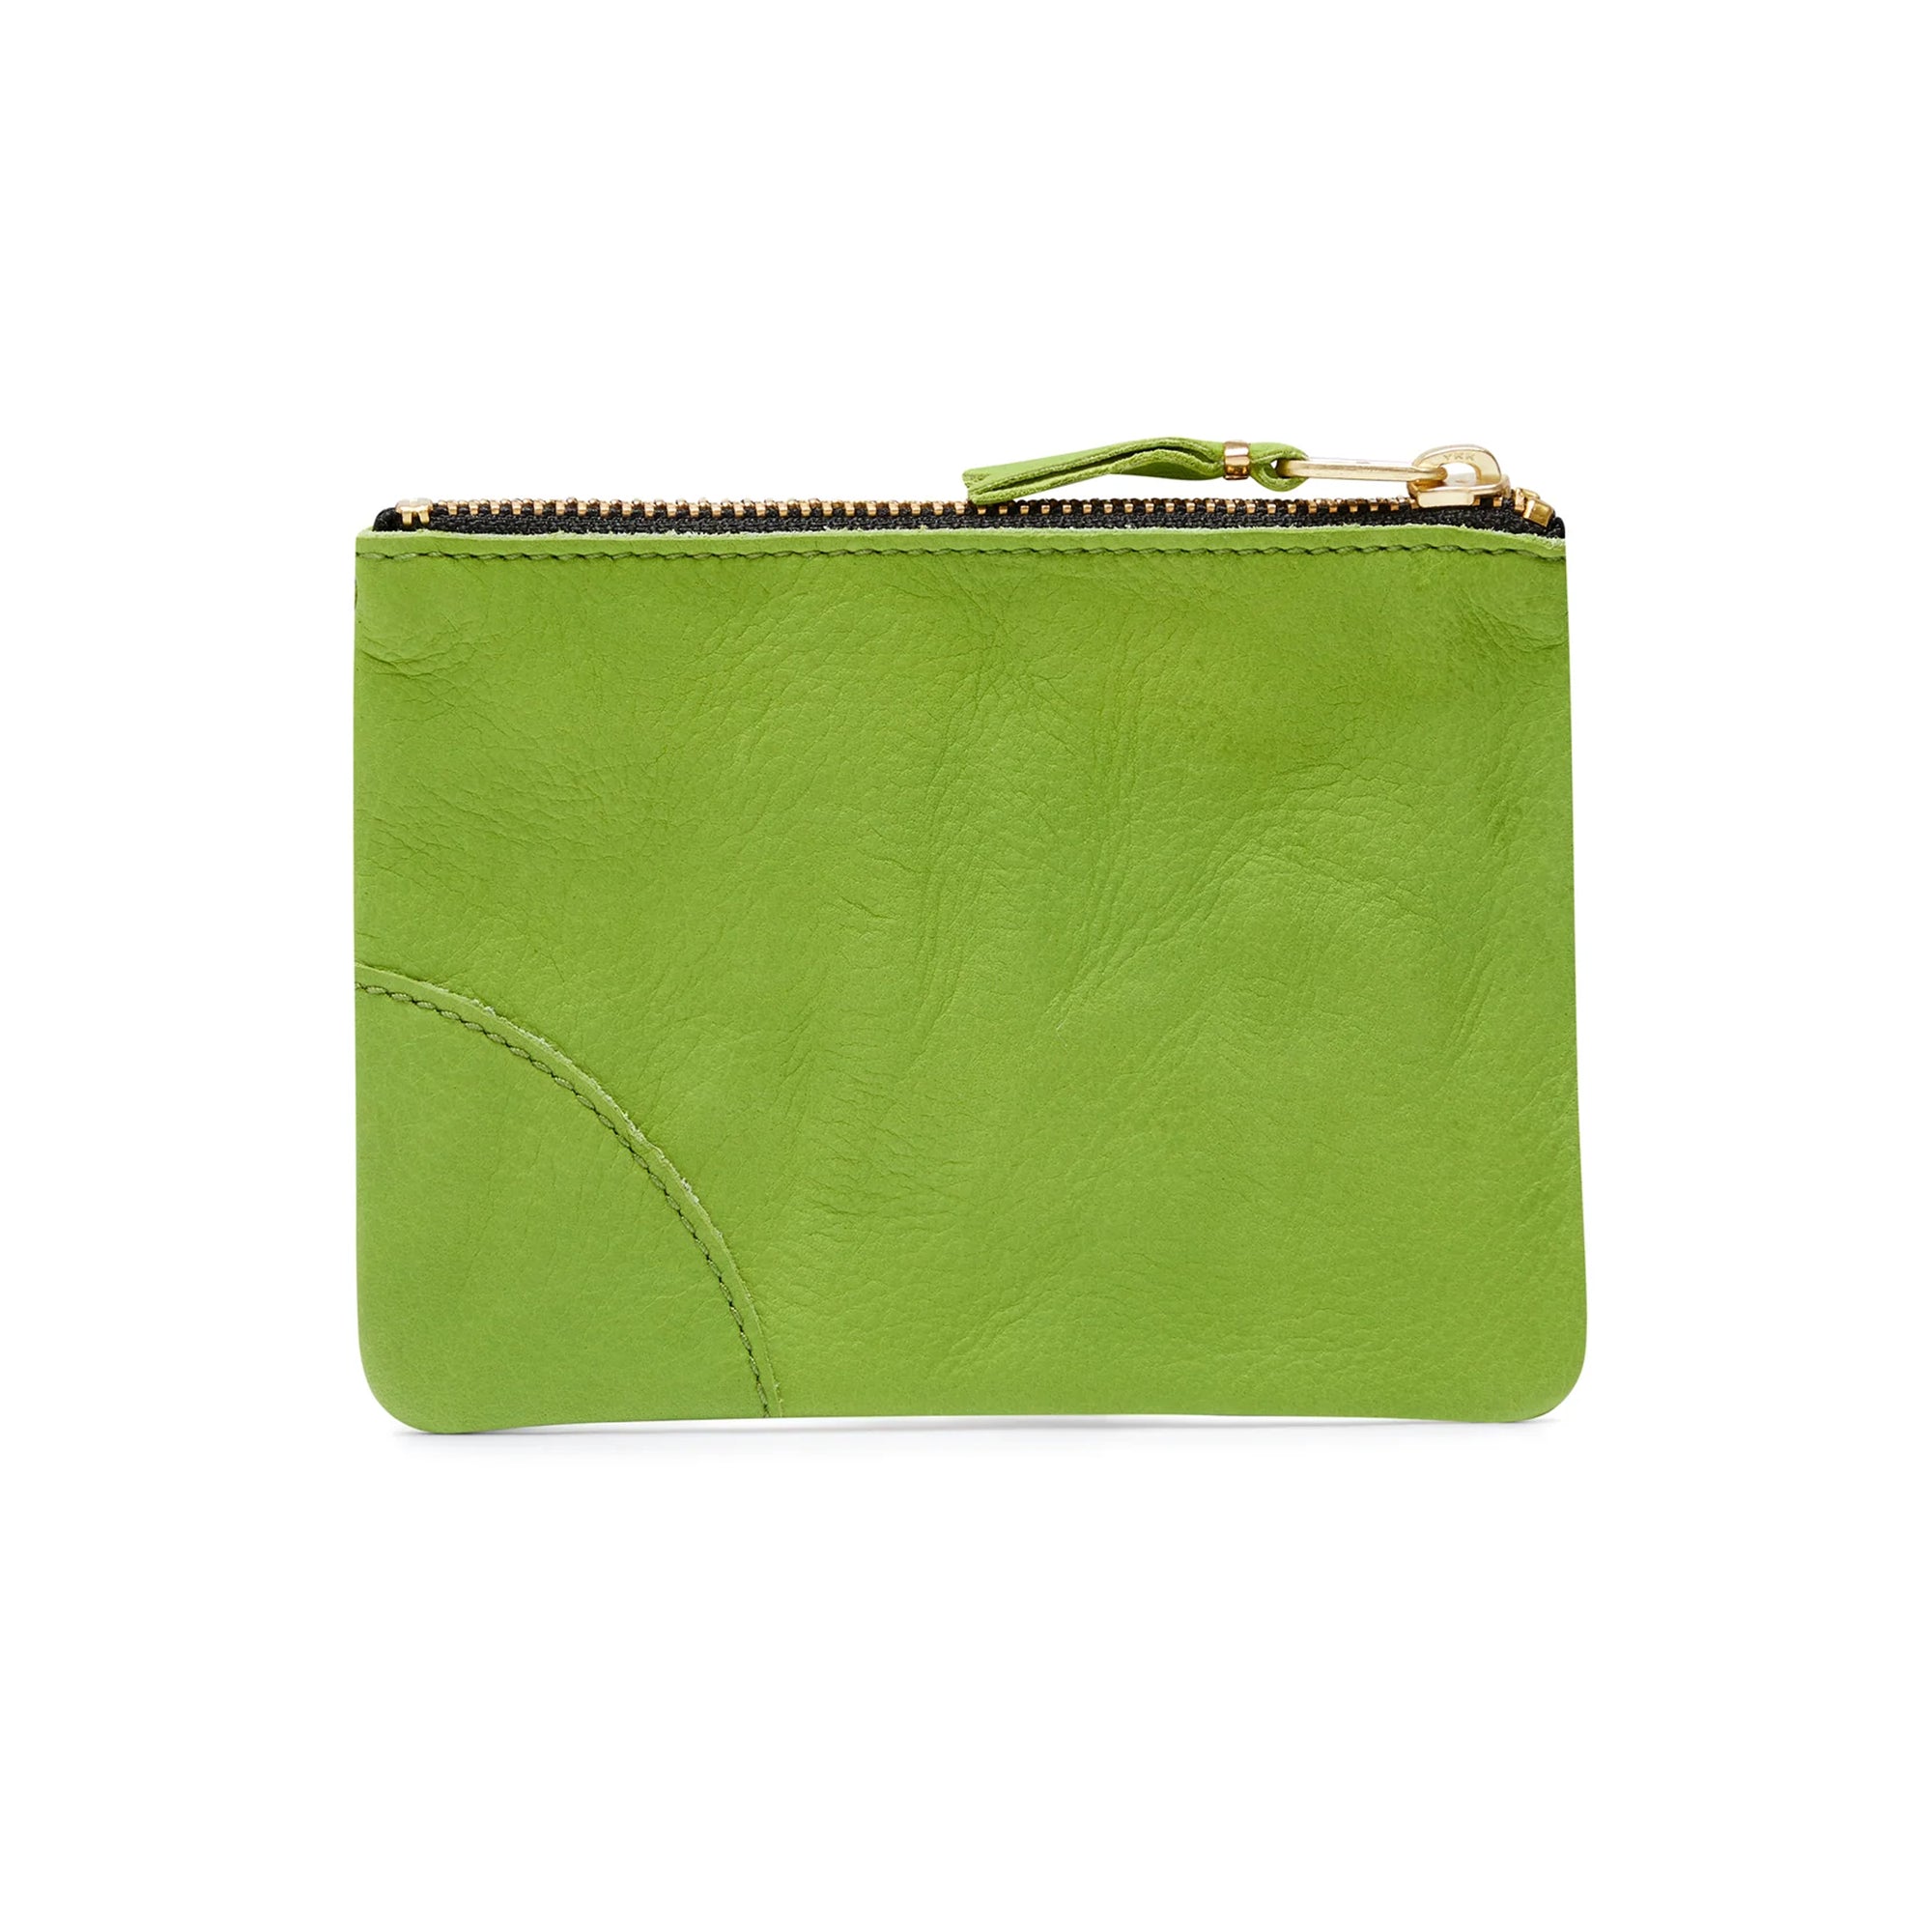 CDG WALLET - Washed Wallet - (8Z-Y081 Green) view 2